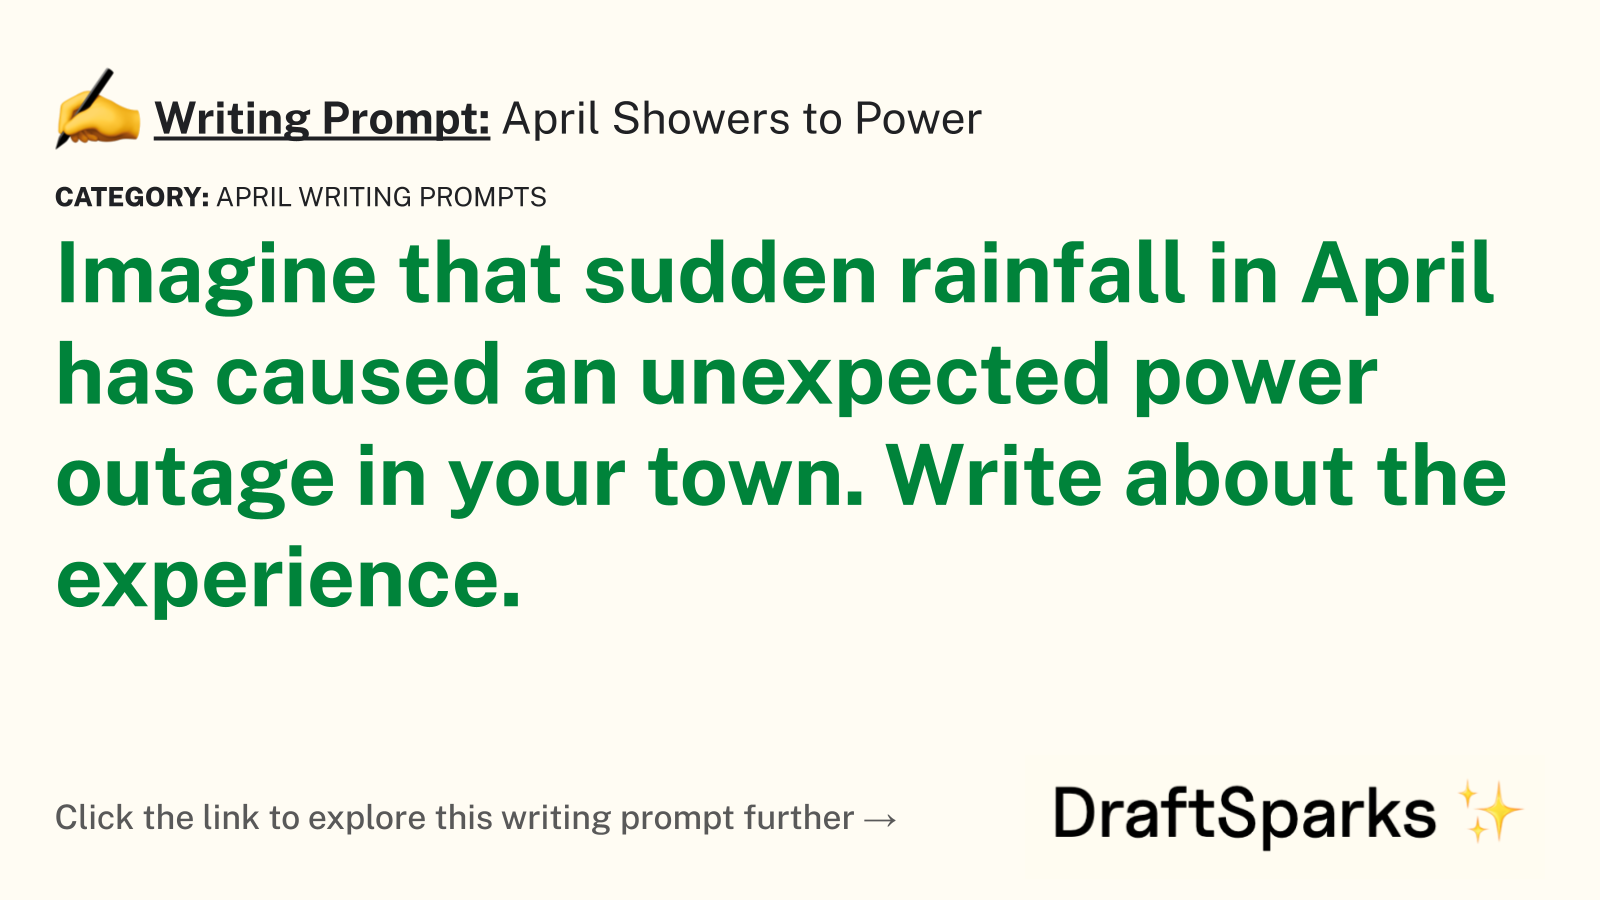 April Showers to Power